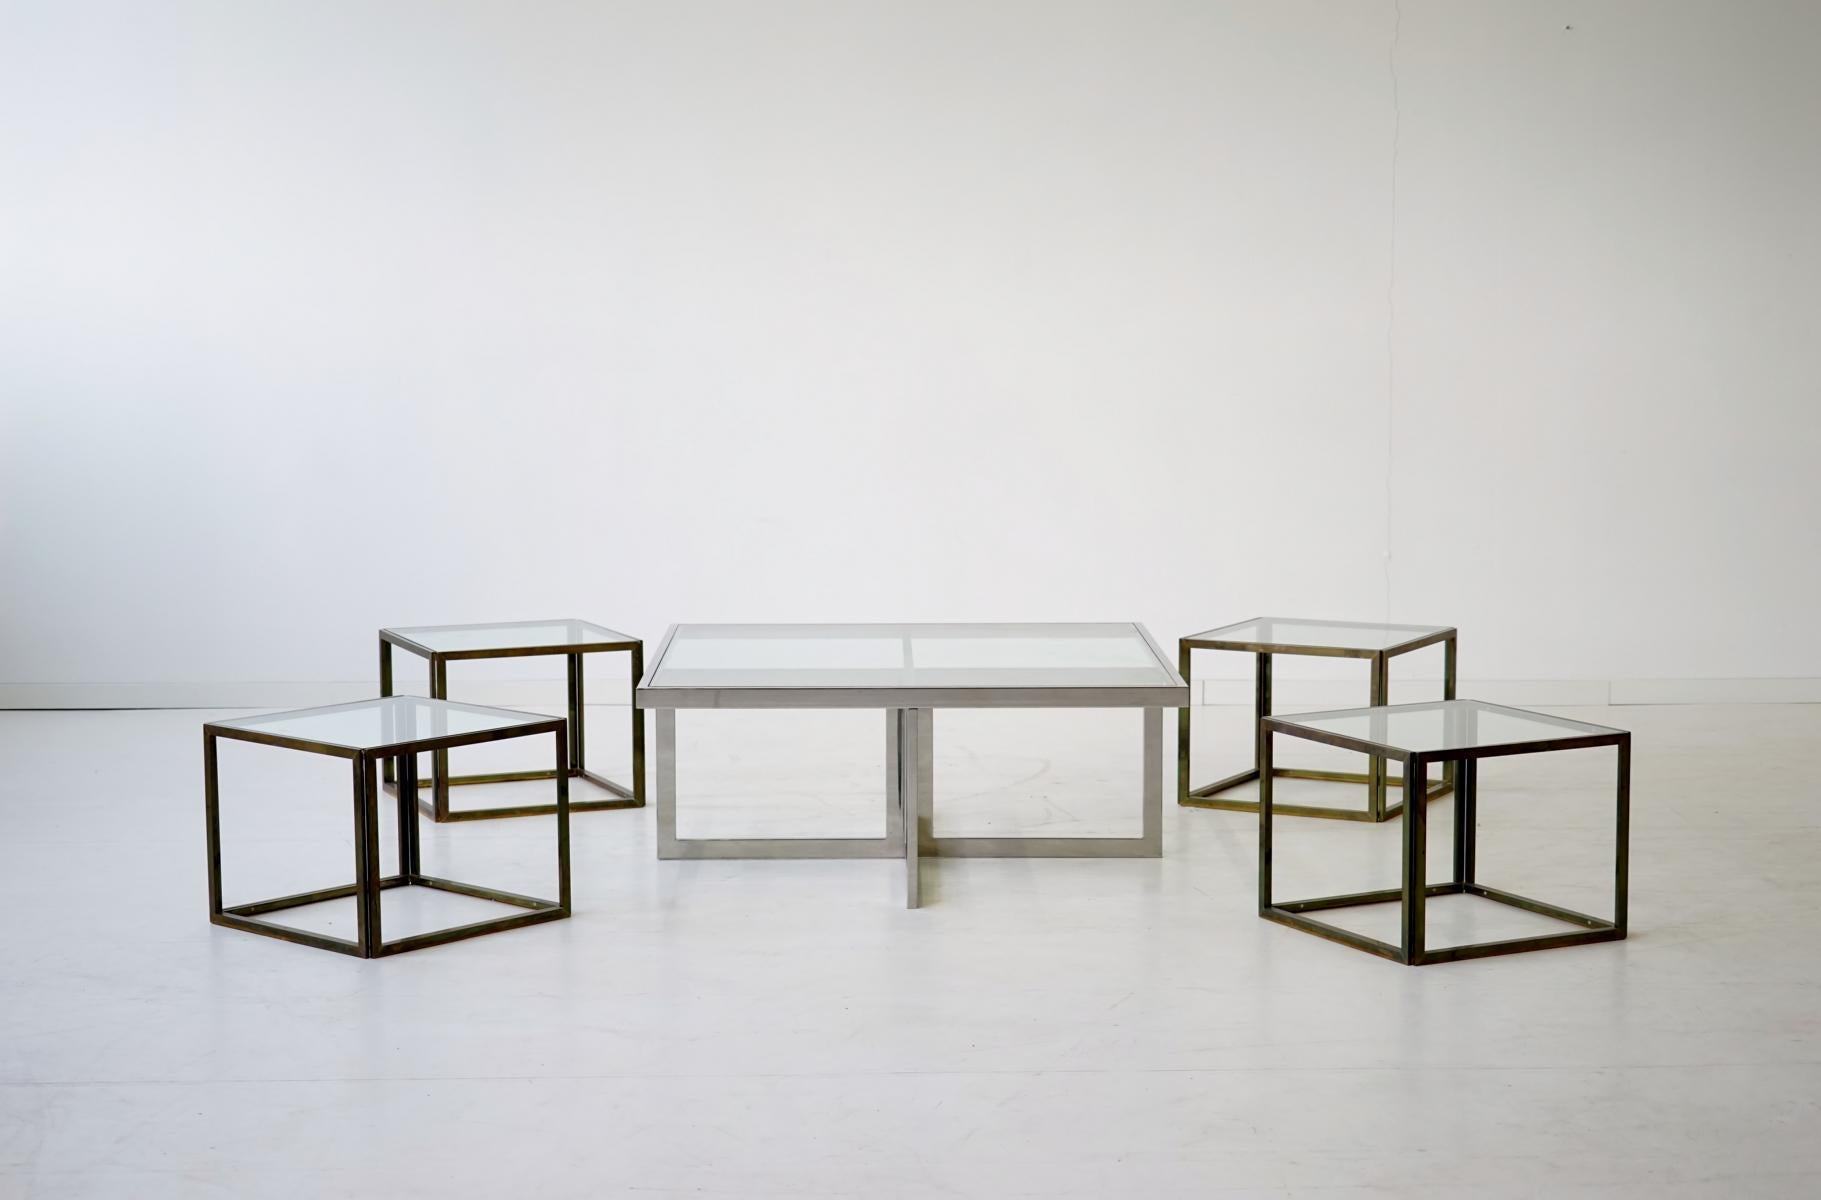 Maison Charles brass coffee table with four nesting tables, 1960s

Rare and elegant chrome/ glass coffee table with four nesting tables in brass and chrome, made by Maison Charles.
The tables are in very good condition. Only light signs of use and